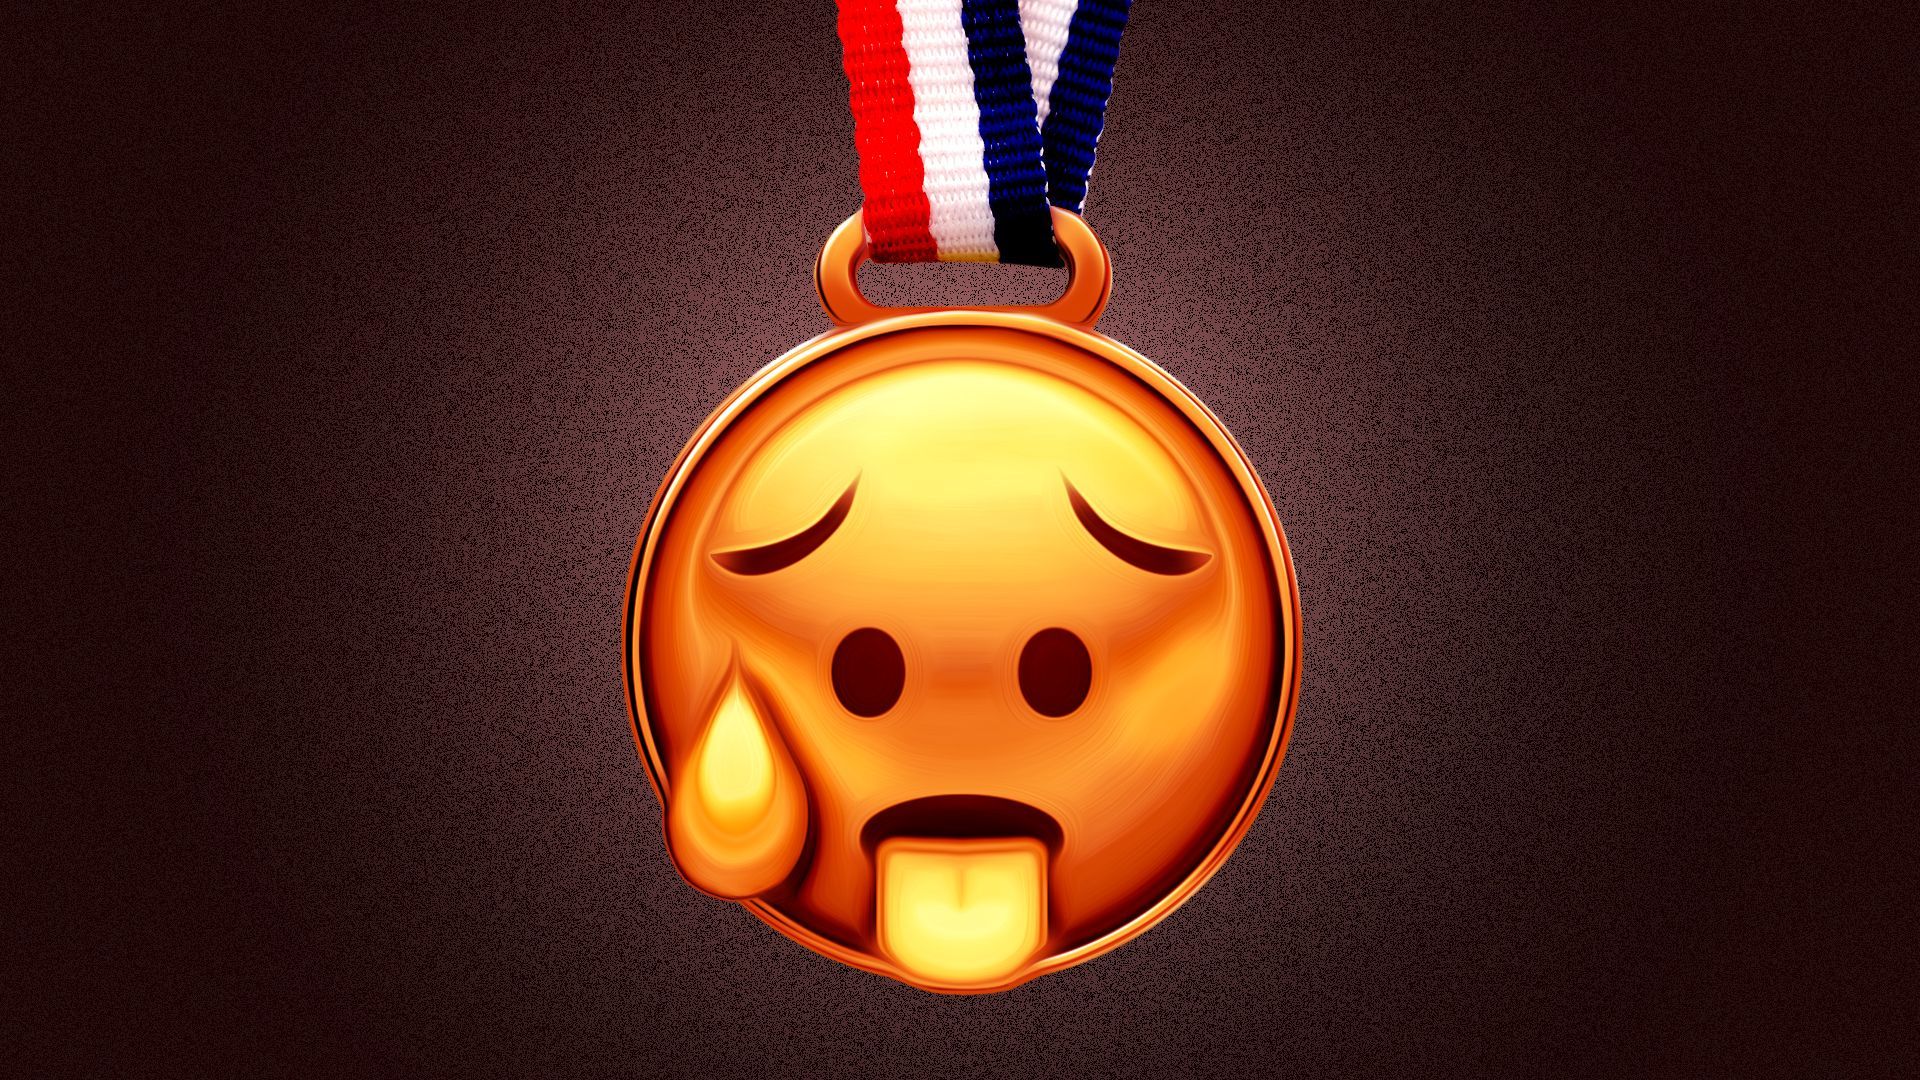 Illustration of a gold medal with a hot emoji face